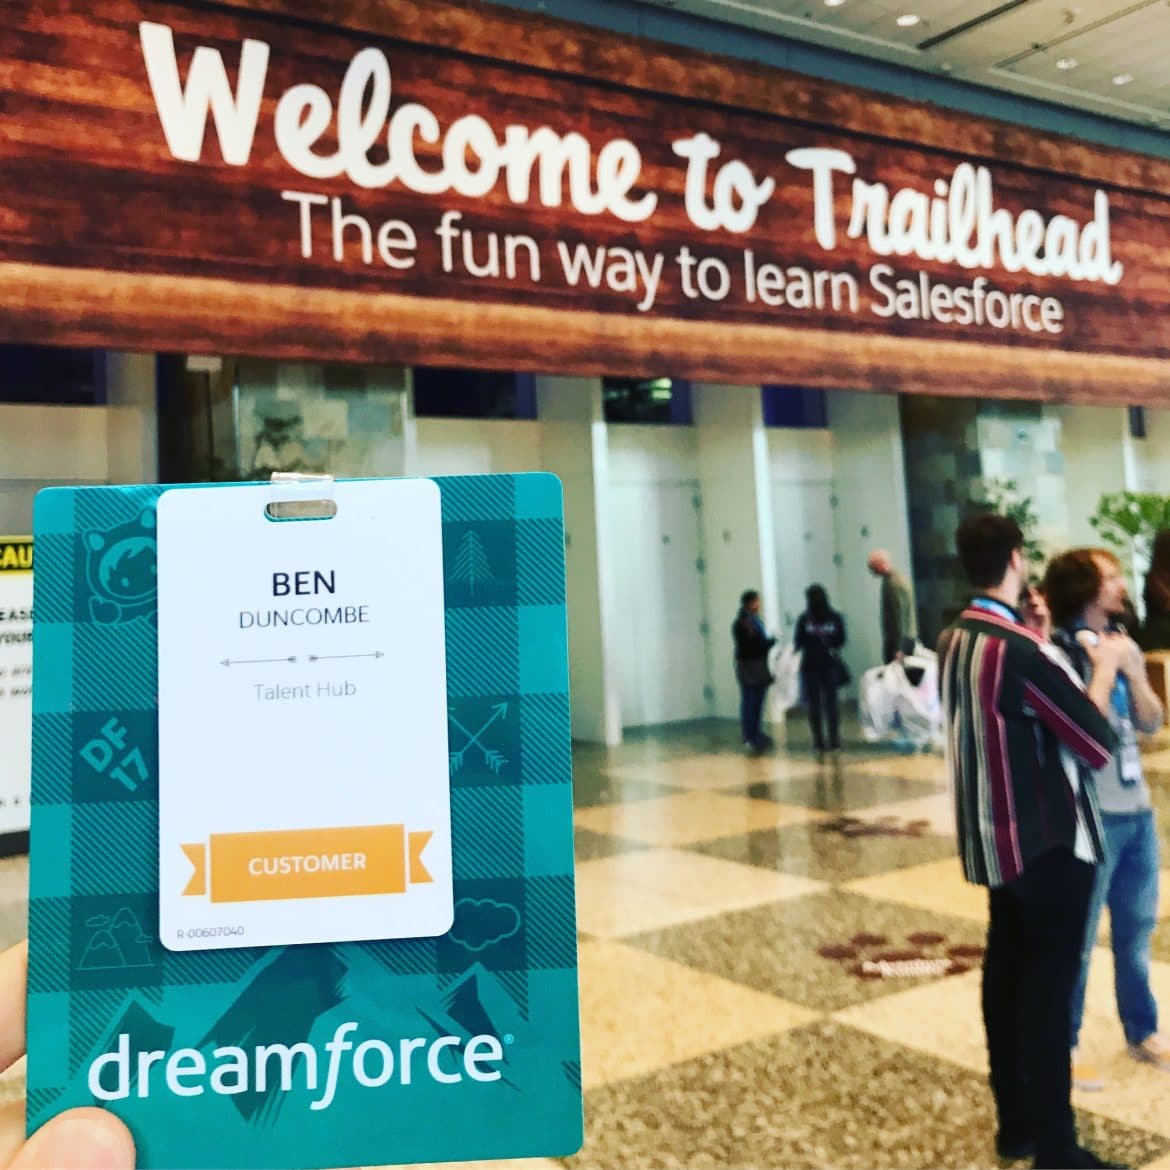 Welcome to Trailhead - key messages from Dreamforce 2017